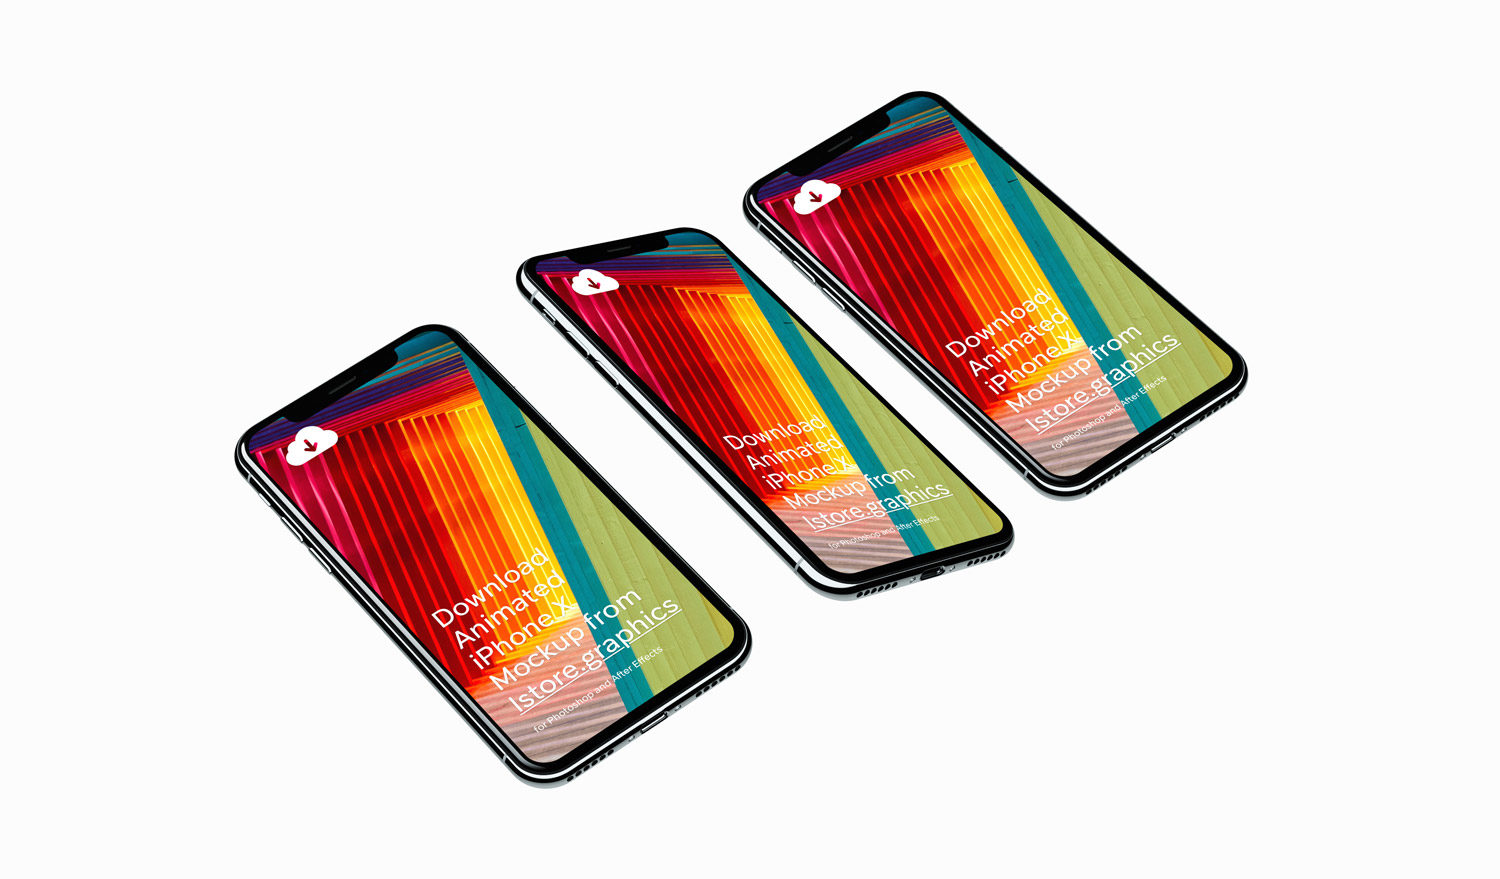 Download 8 High Resolution iPhone X Mockups (Sketch and Photoshop) | Free Mockup